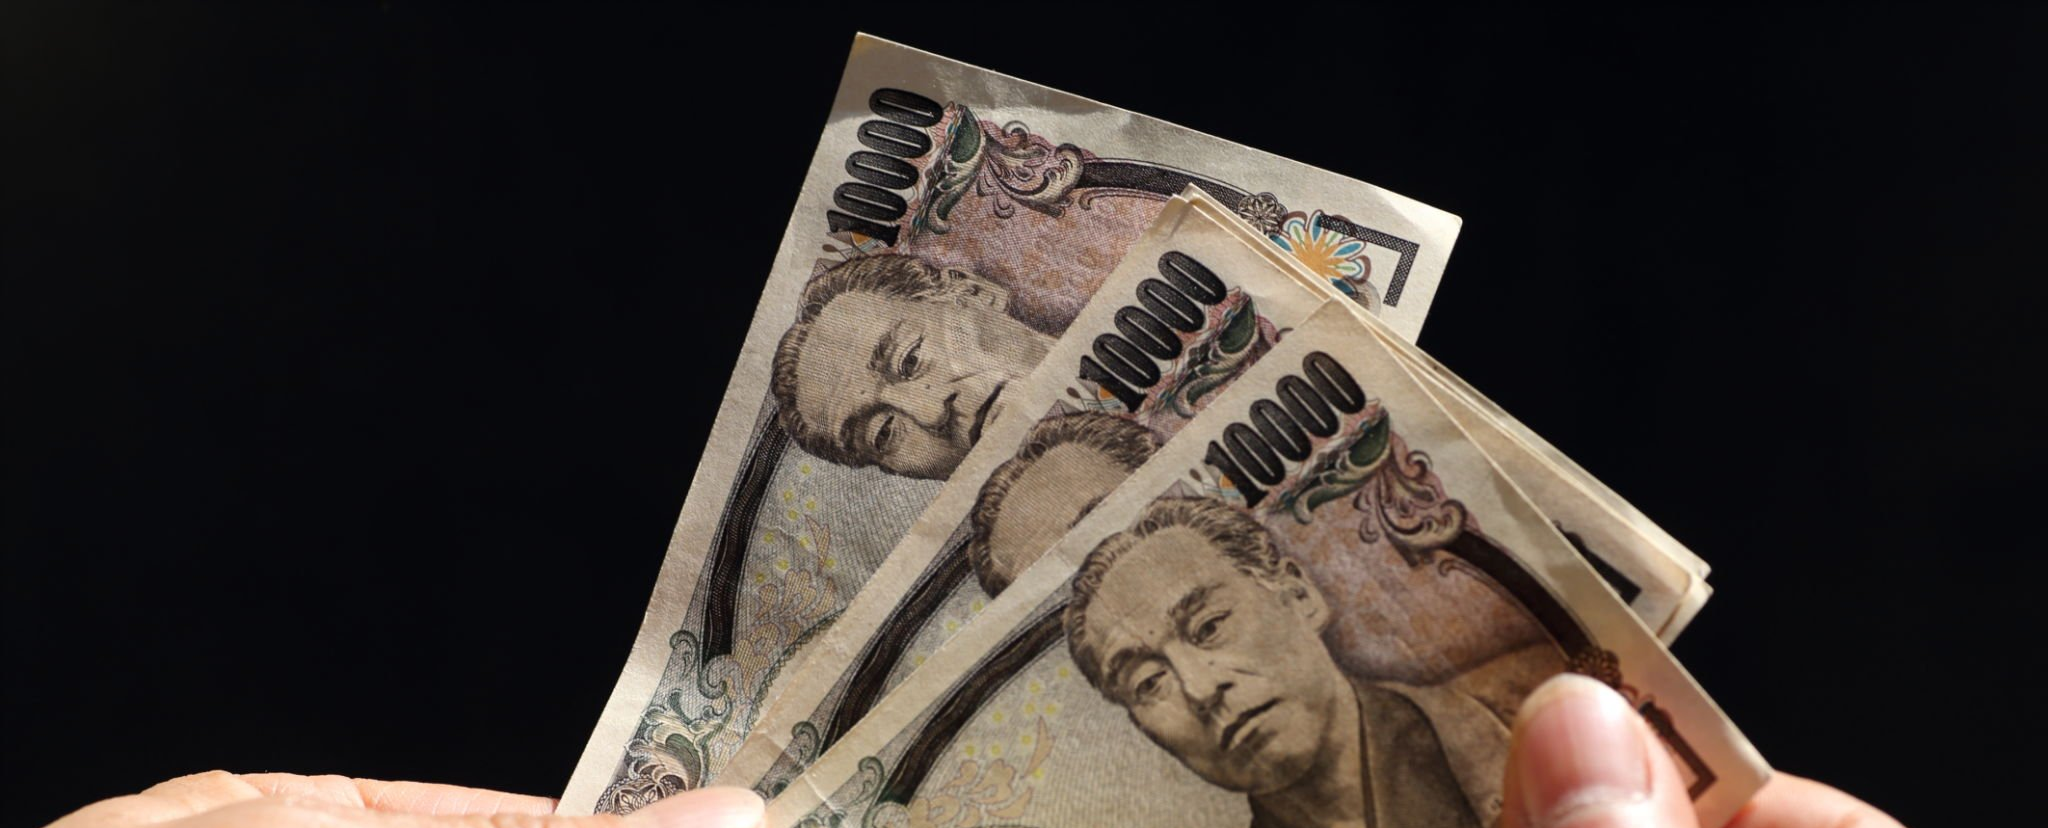 The yen crashed through the 160 level against the greenback, stoking intervention talks as Japan has warned about excessive volatility but taken no action.